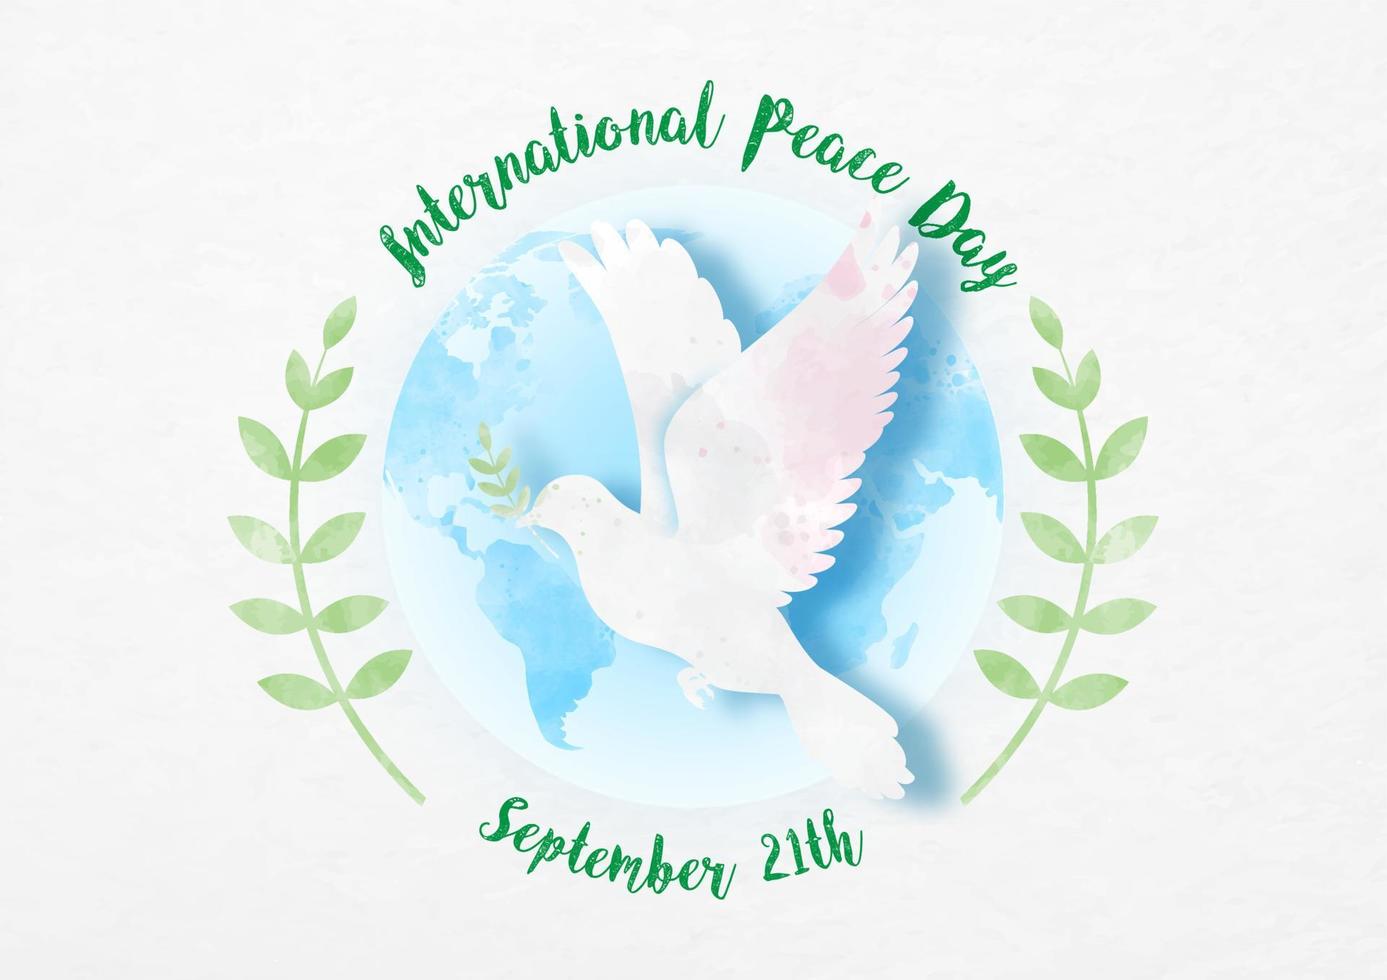 Doves peace with the day and name of campaign on a global and olive branch in paper cut and watercolors style on white paper pattern background. vector